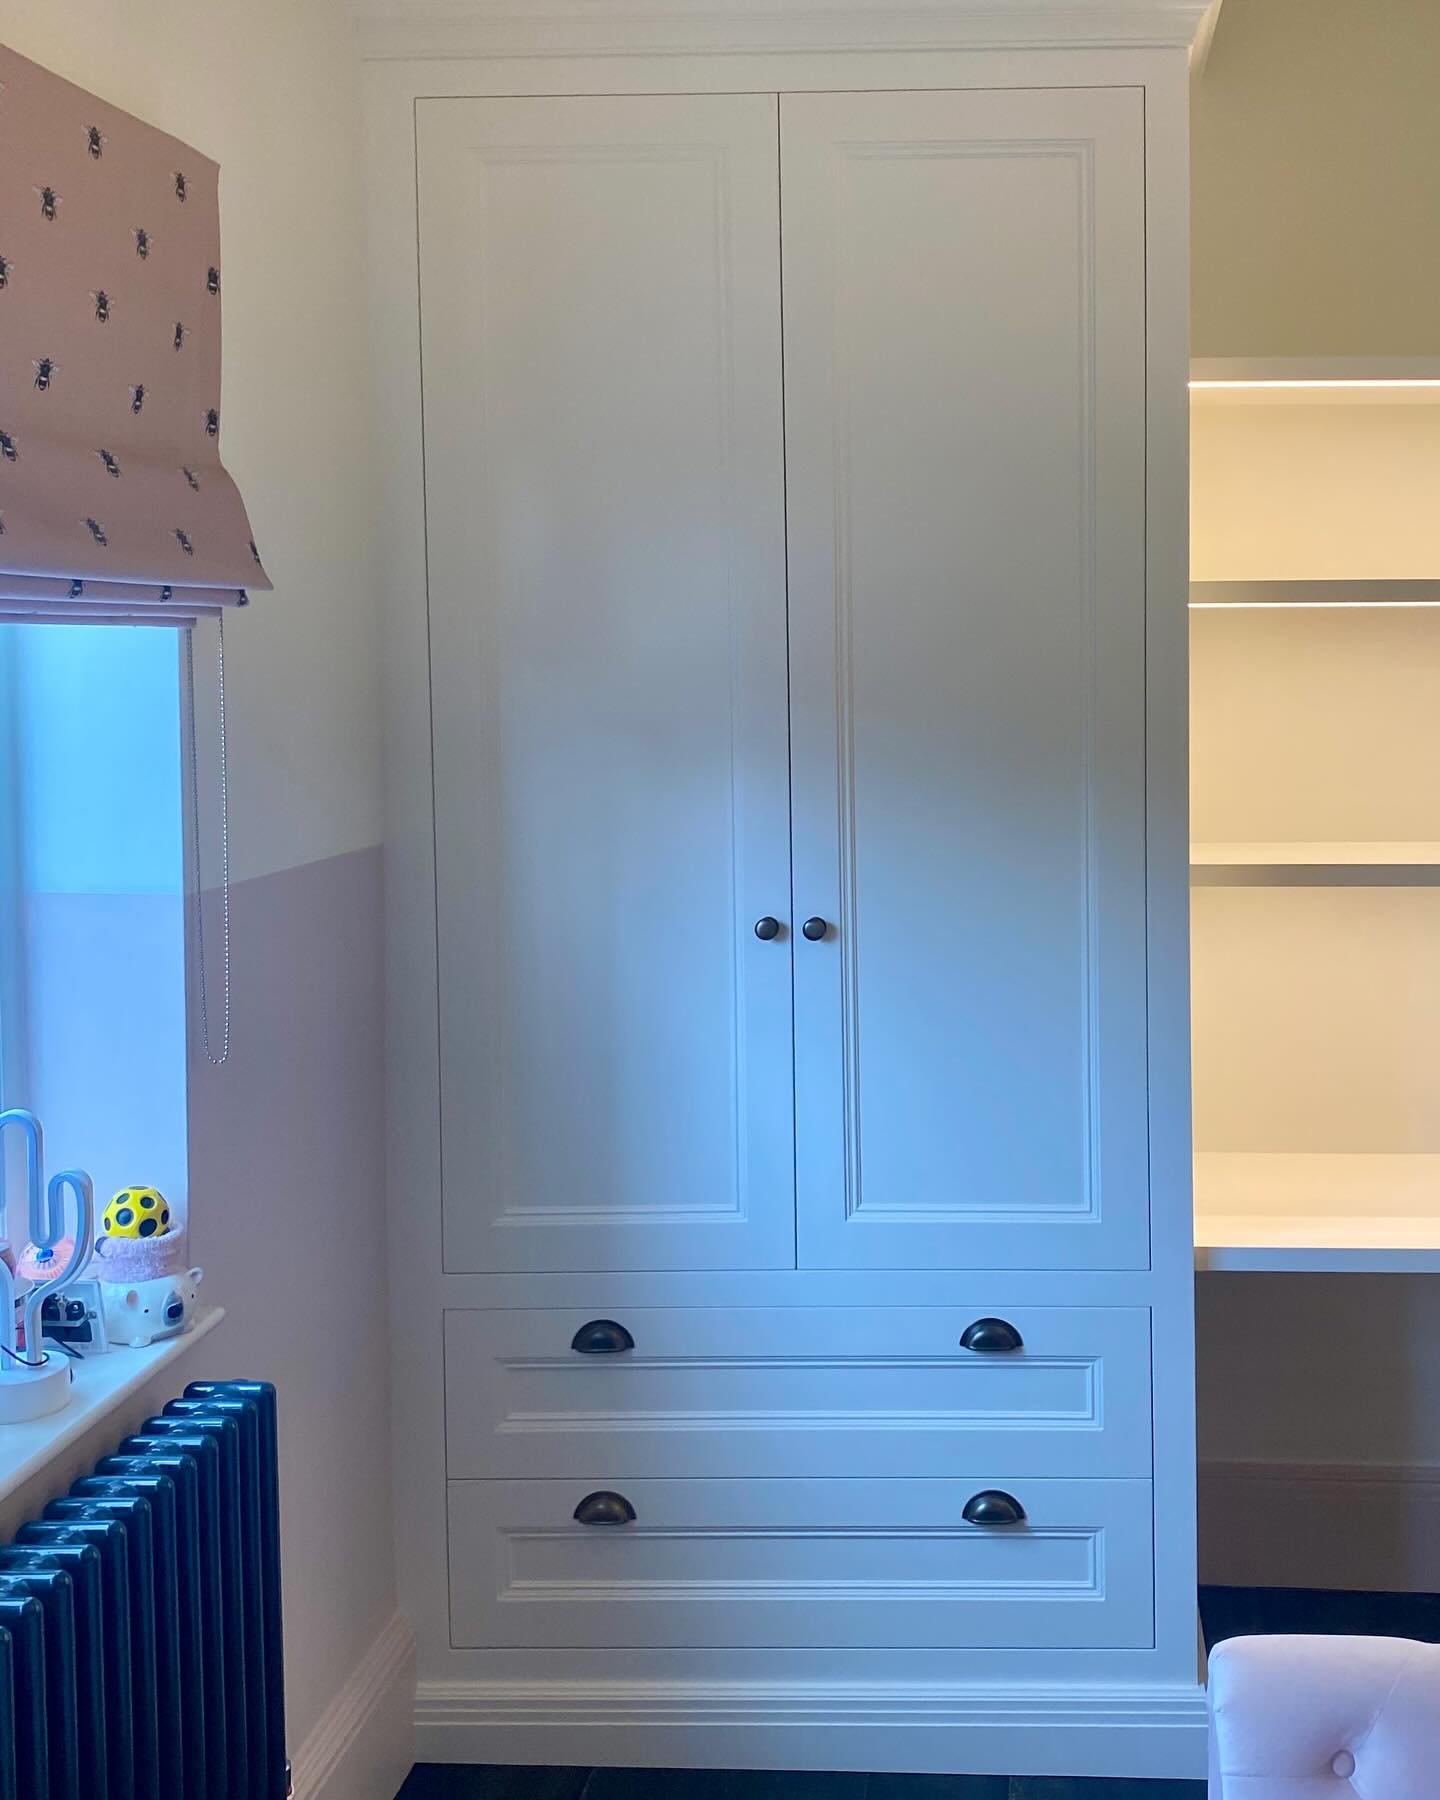 A classic wardrobe for a child&rsquo;s bedroom in a local Georgian house. Spray finished in a match for Farrow &amp; Ball Pointing. We completed the look with some antique brass effect handles chosen by the client. ✨.
.
.
.
#wardrobedesign #bespokewa